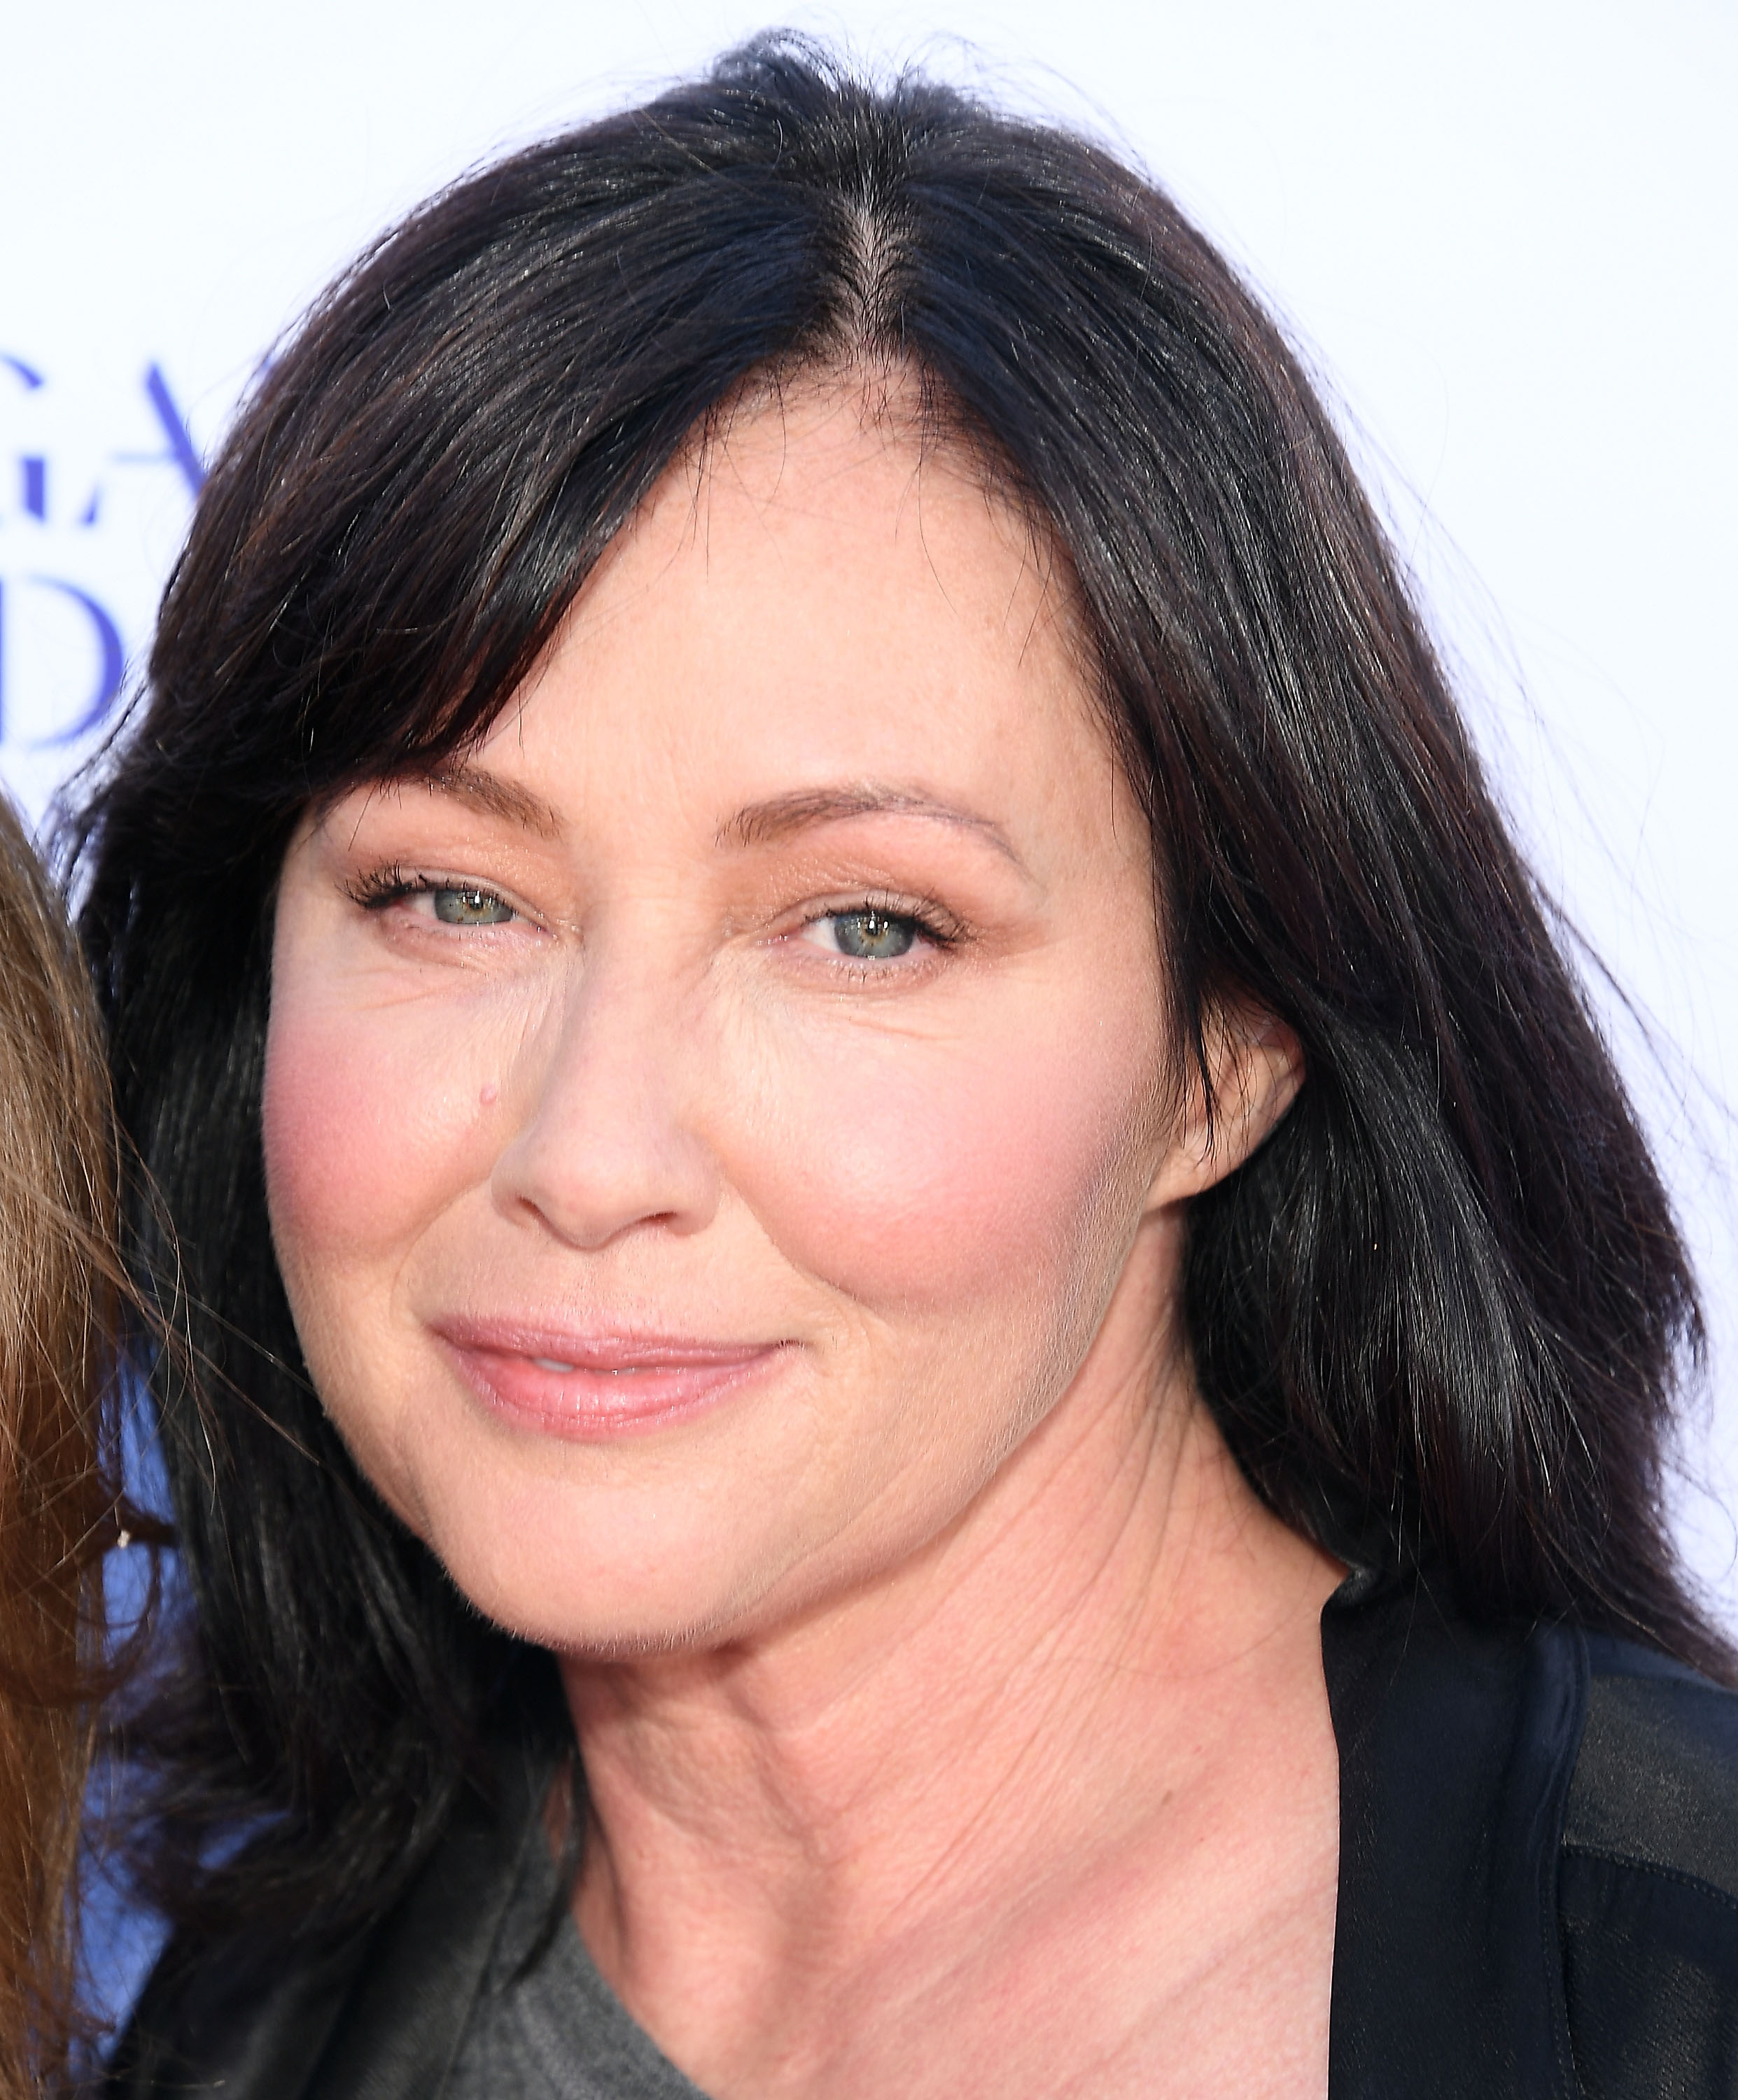 Shannen Doherty on September 7, 2018 in Santa Monica, California. | Source: Getty Images